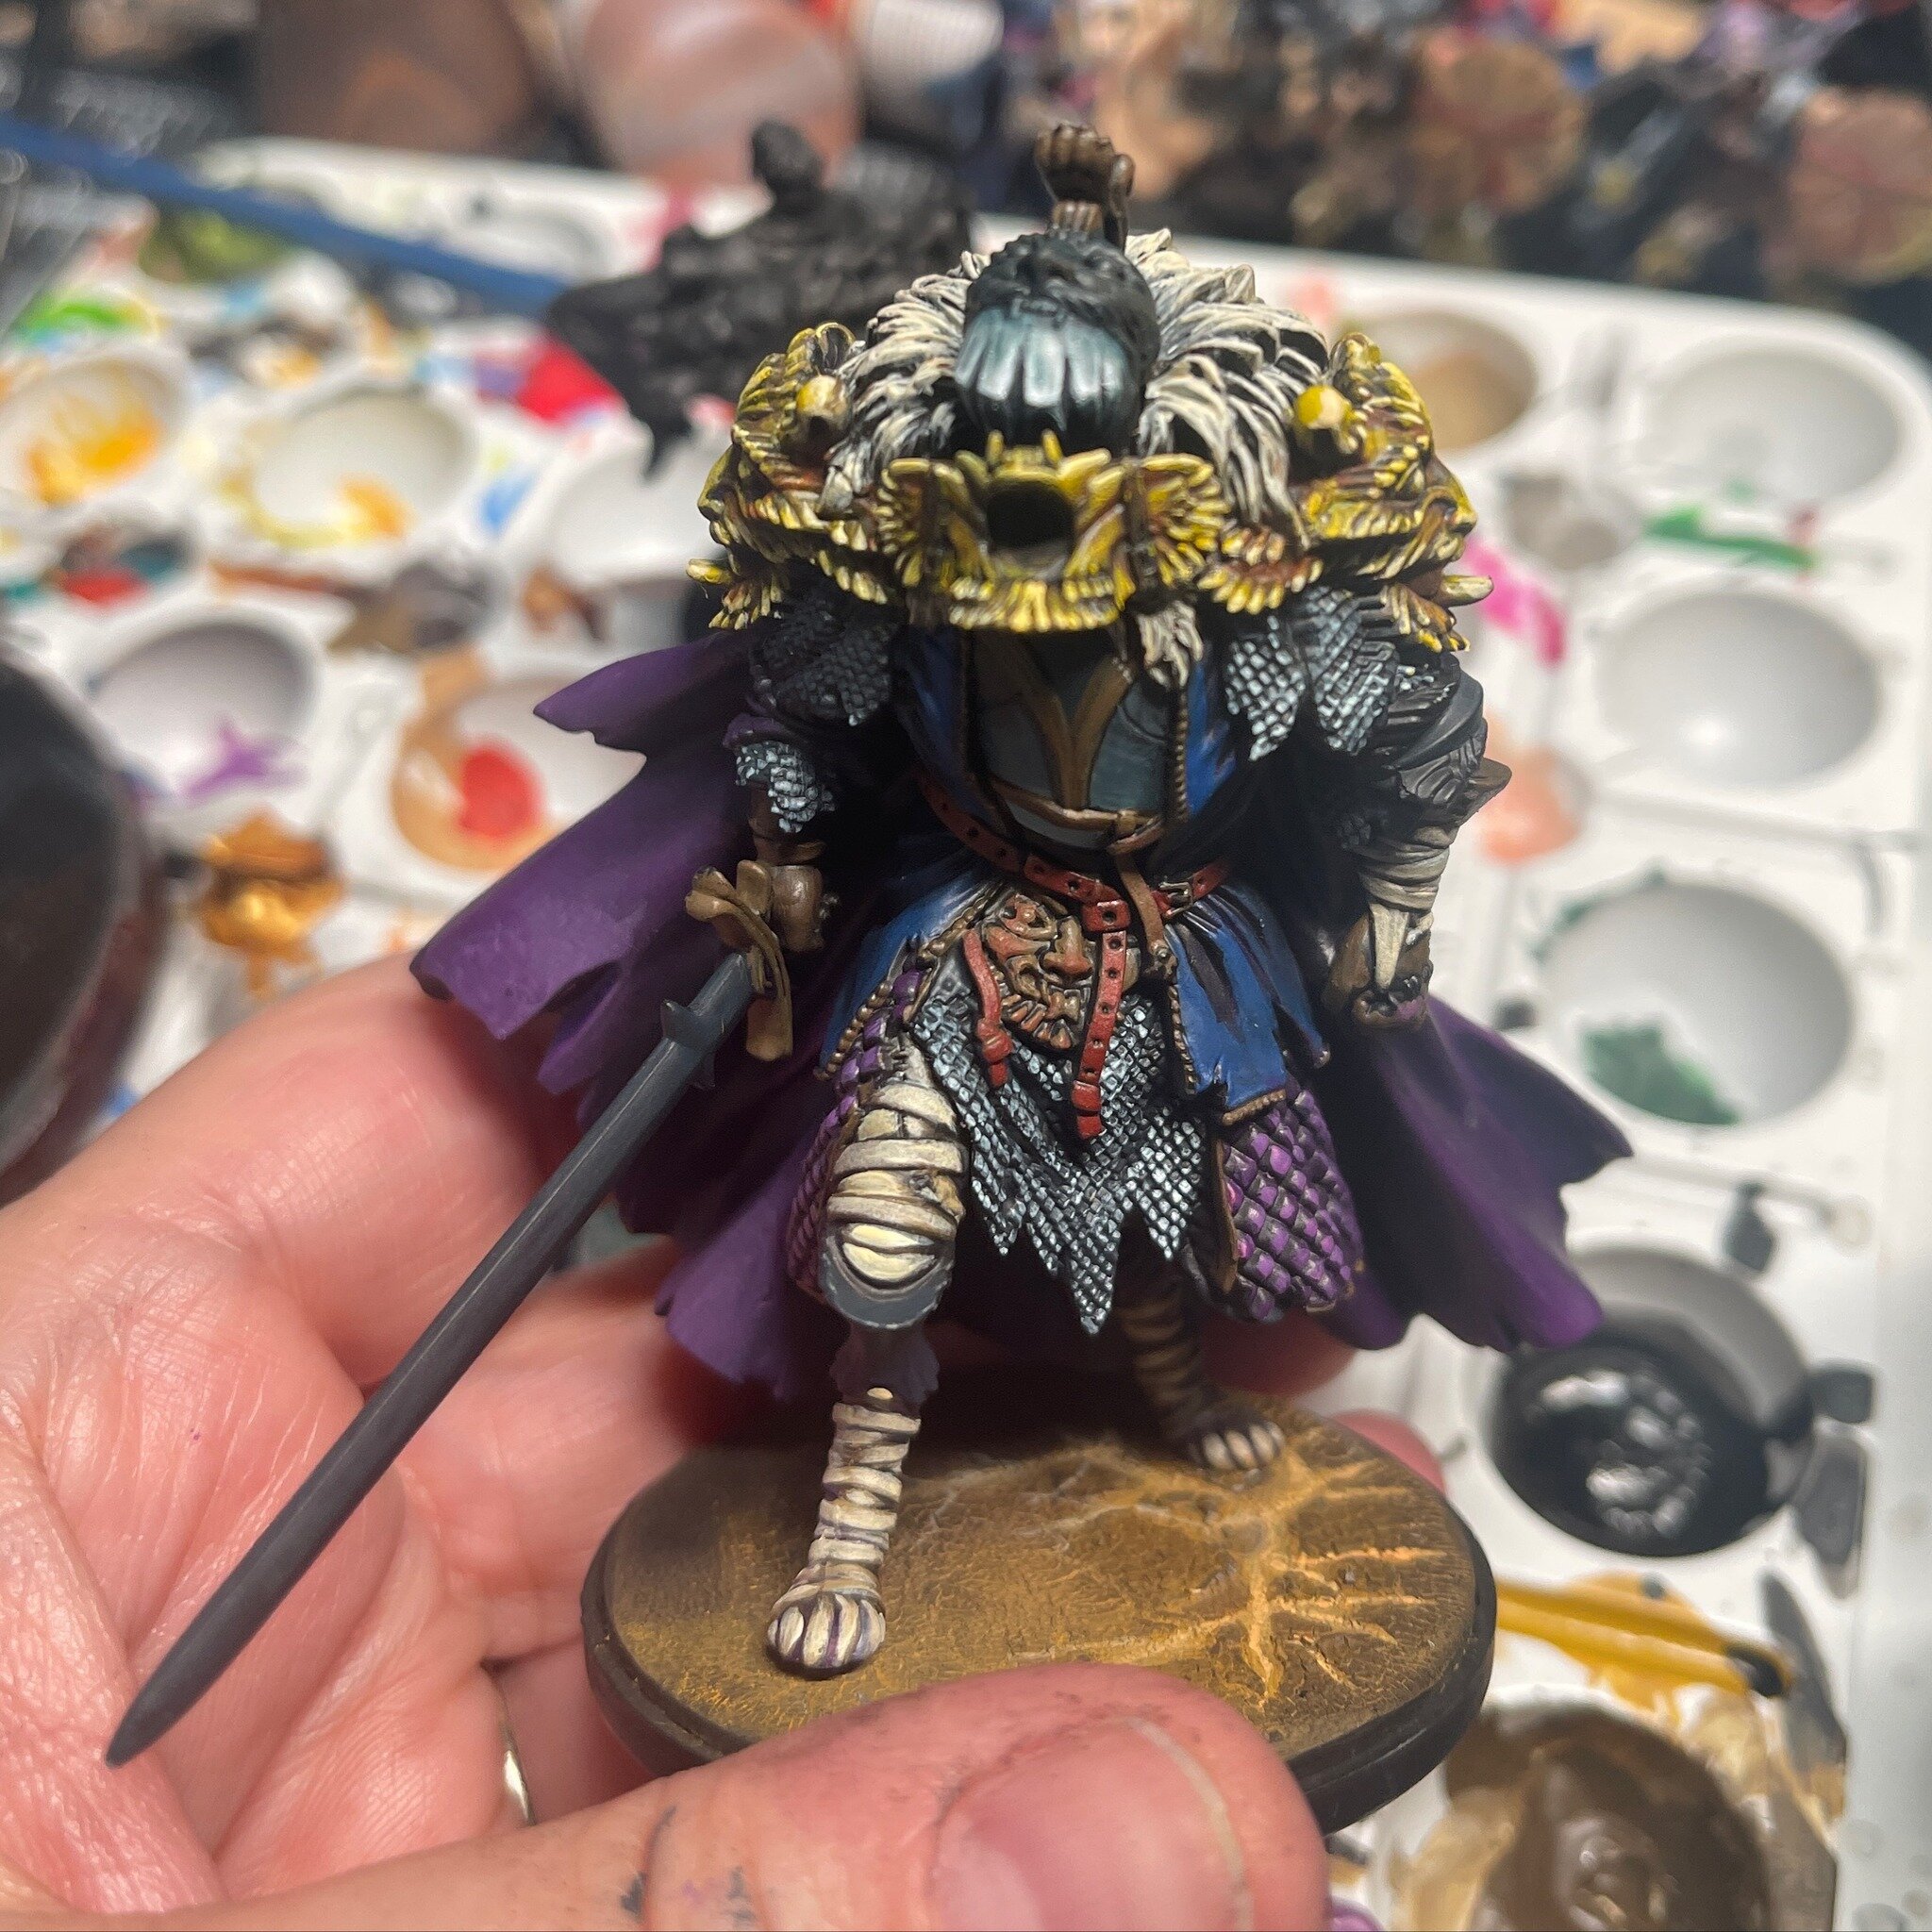 Making headway on the @kingdomdeath Black Knight! It&rsquo;s the first time I&rsquo;ve tried painting this model using Non-Metallic Metals rather than metallic paints. I am using the work of Branislav Babovic as inspiration on the metals go check out